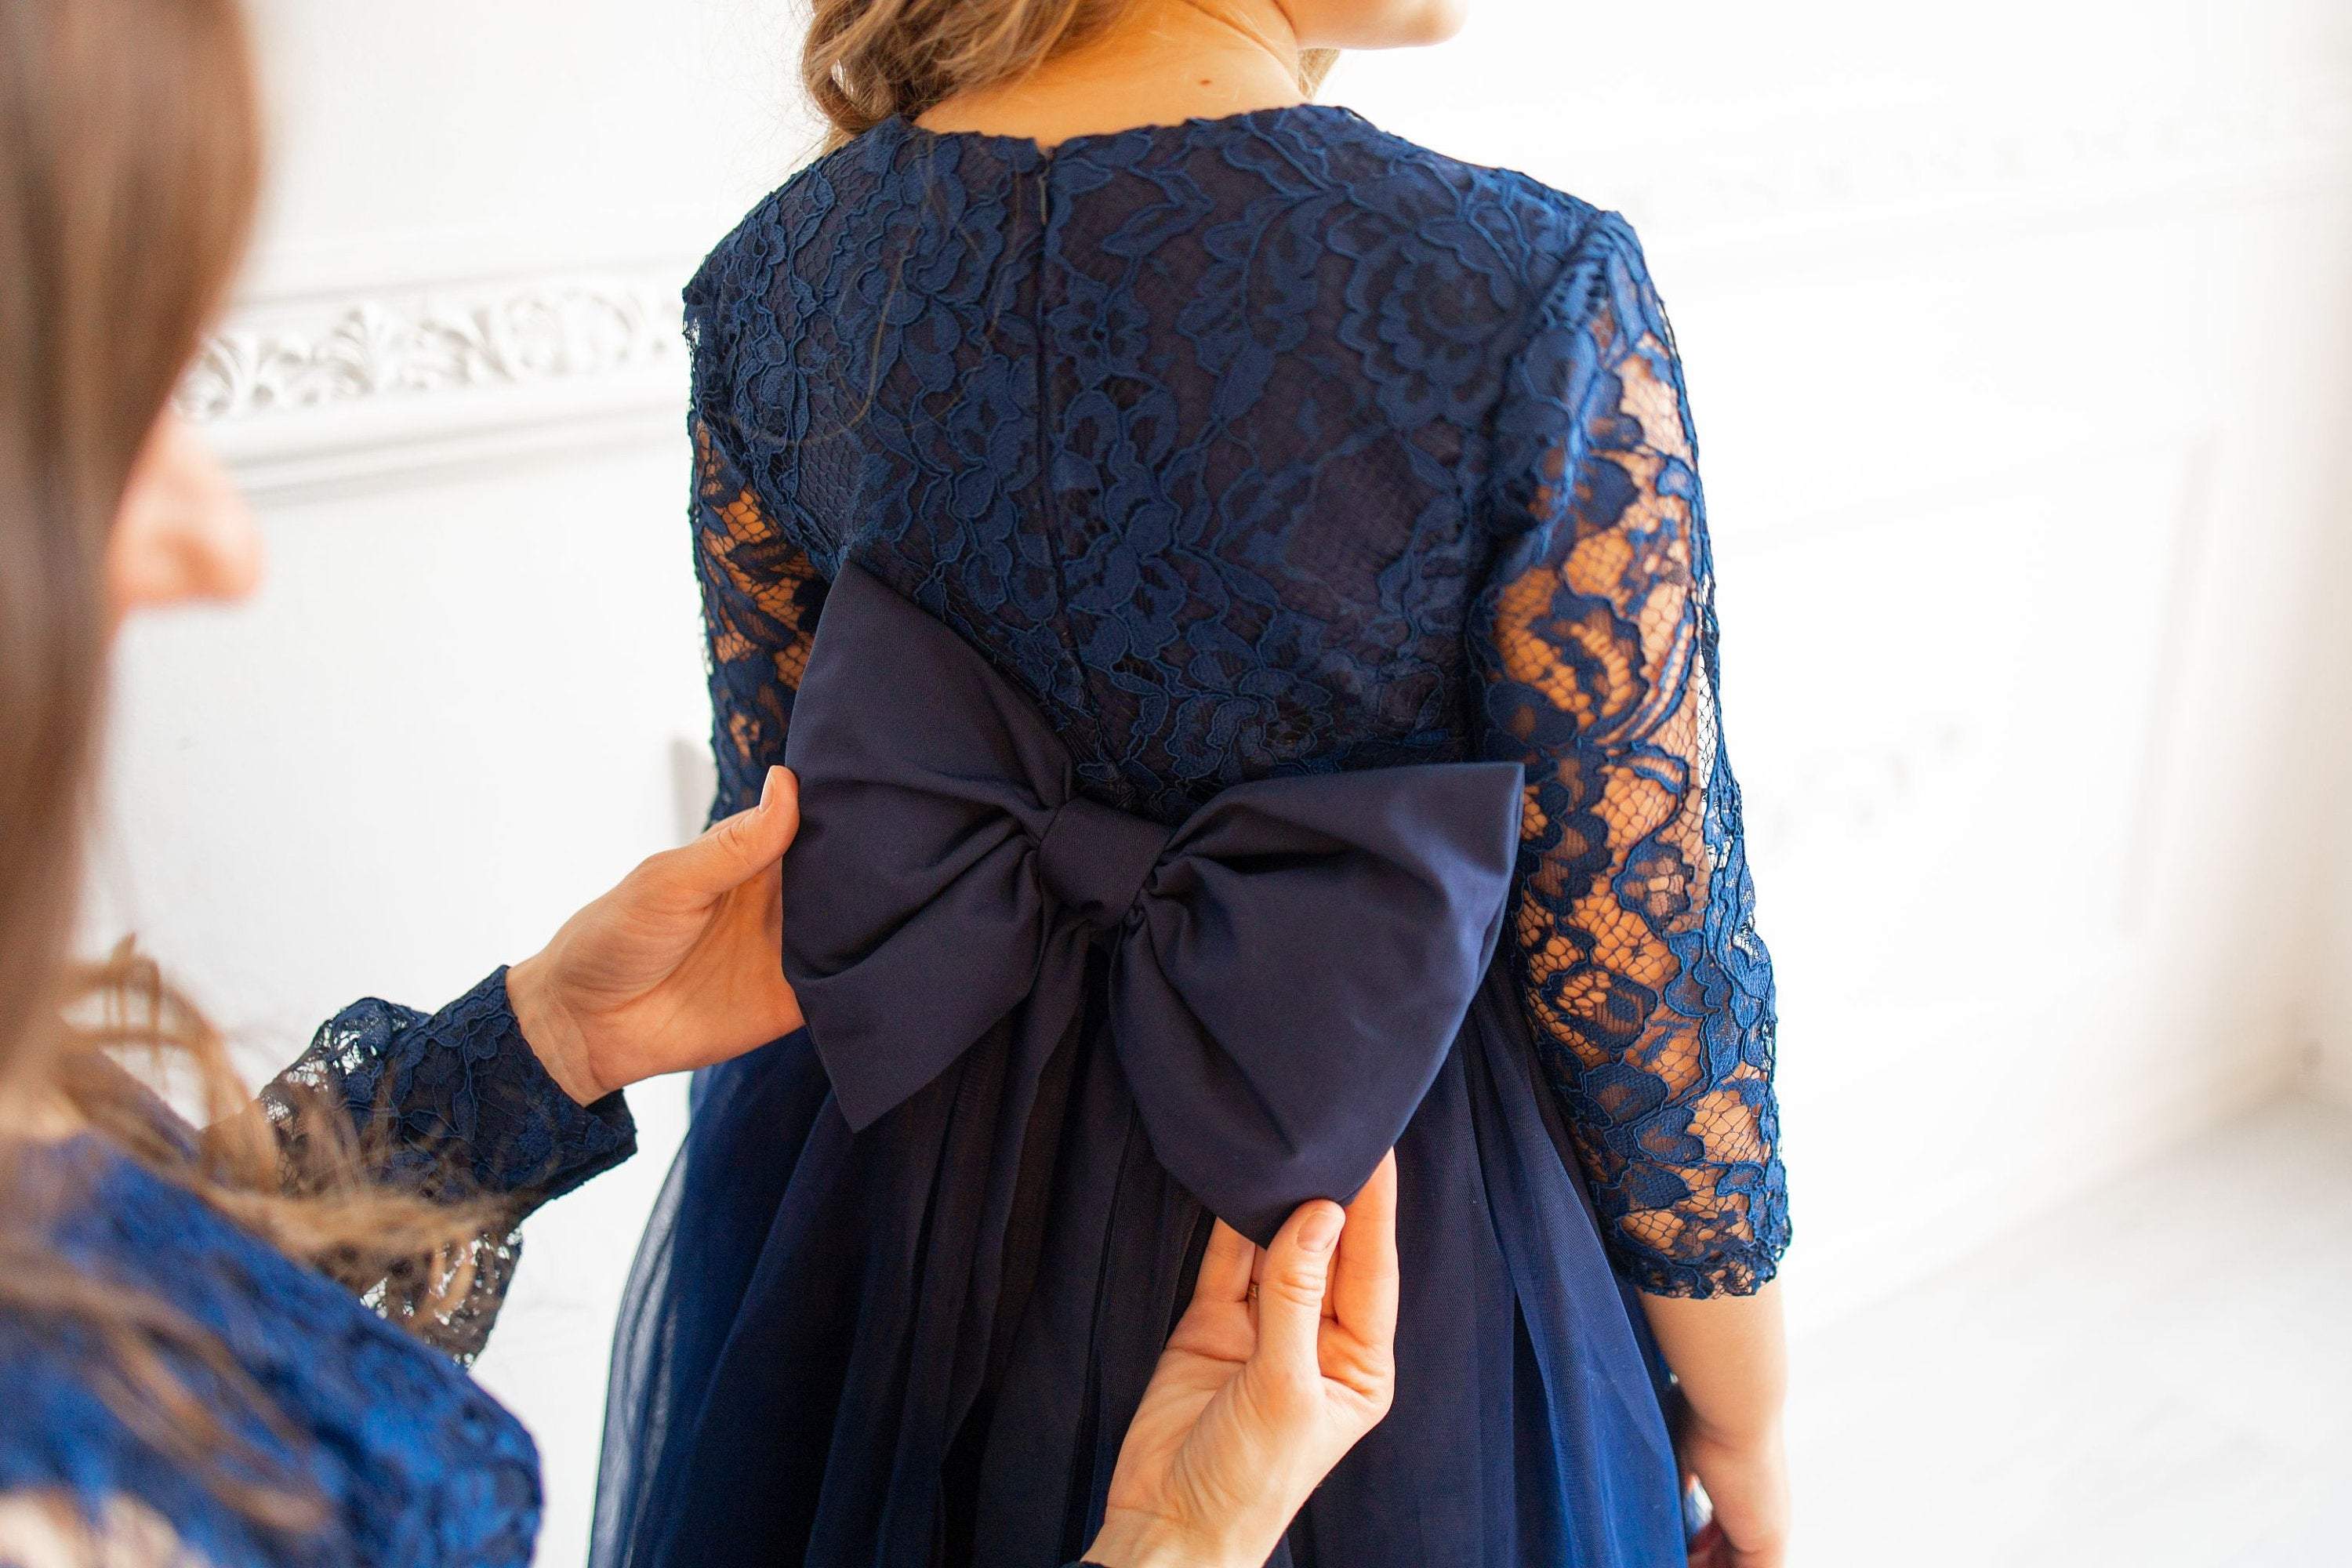 https://www.matchinglook.com/cdn/shop/products/mother-daughter-matching-dress-photoshoot-dress-navy-blue-dresses-mommy-and-me-dress-lace-matching-outfit-formal-photoprops-dress-matchinglook-315815@2x.jpg?v=1627882818